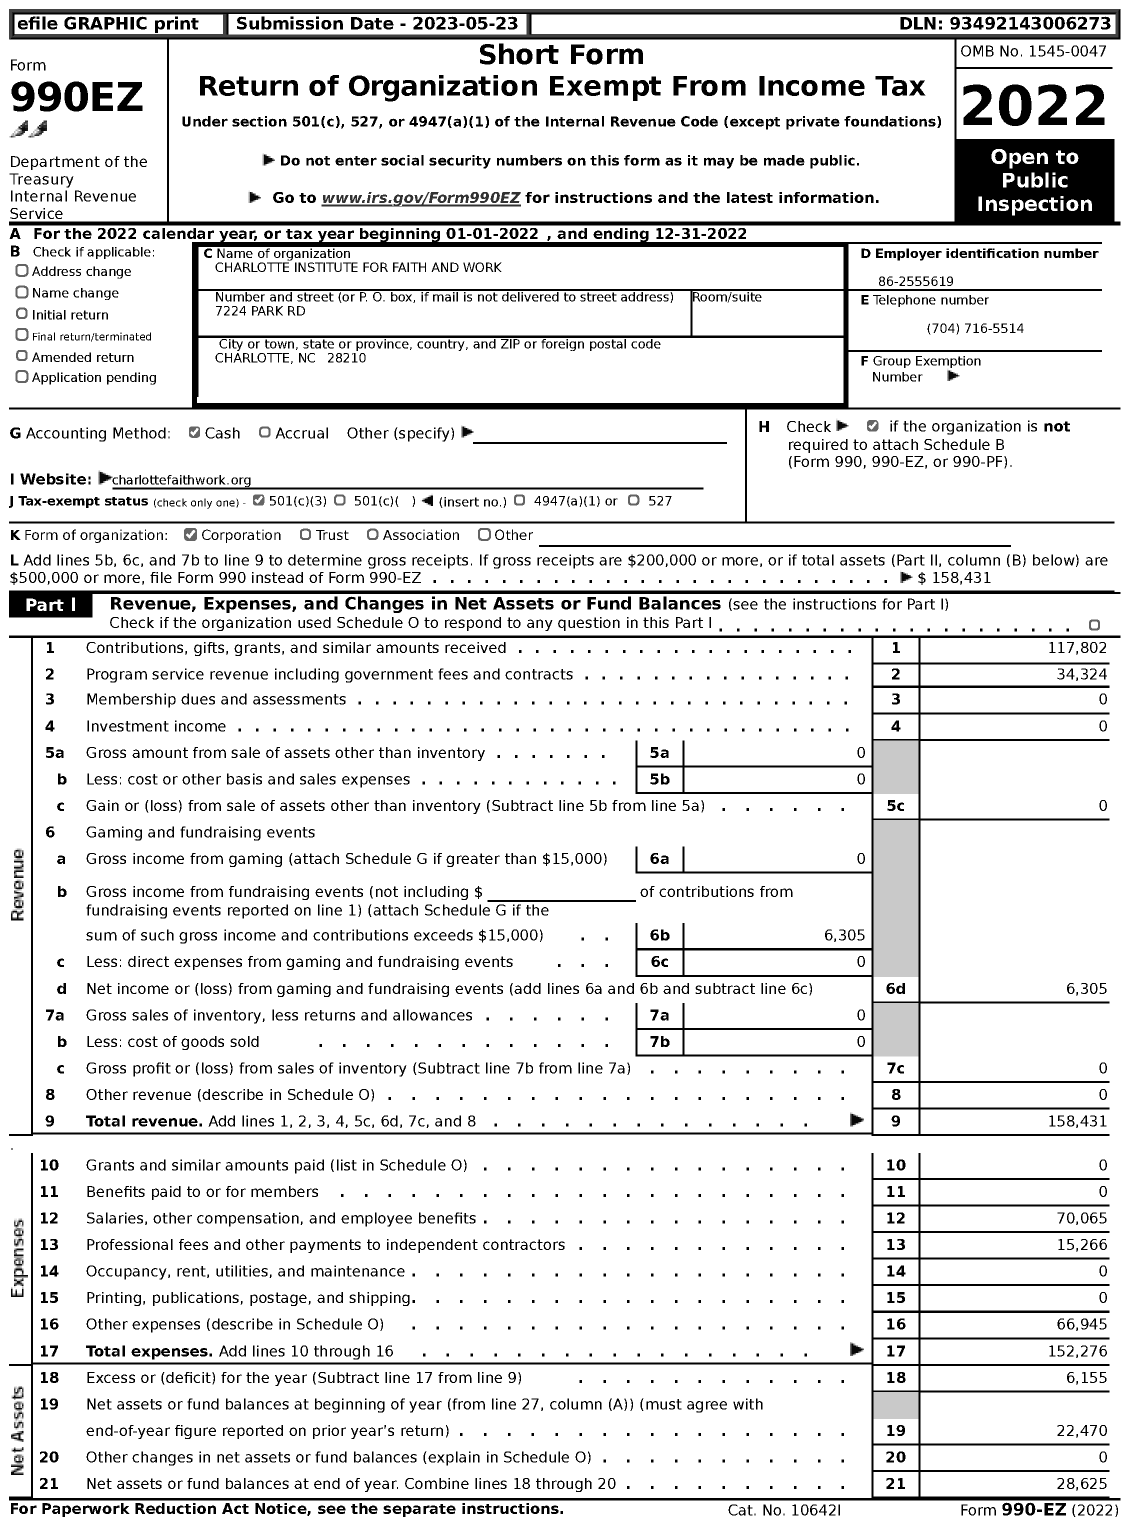 Image of first page of 2022 Form 990EZ for Charlotte Institute for Faith and Work